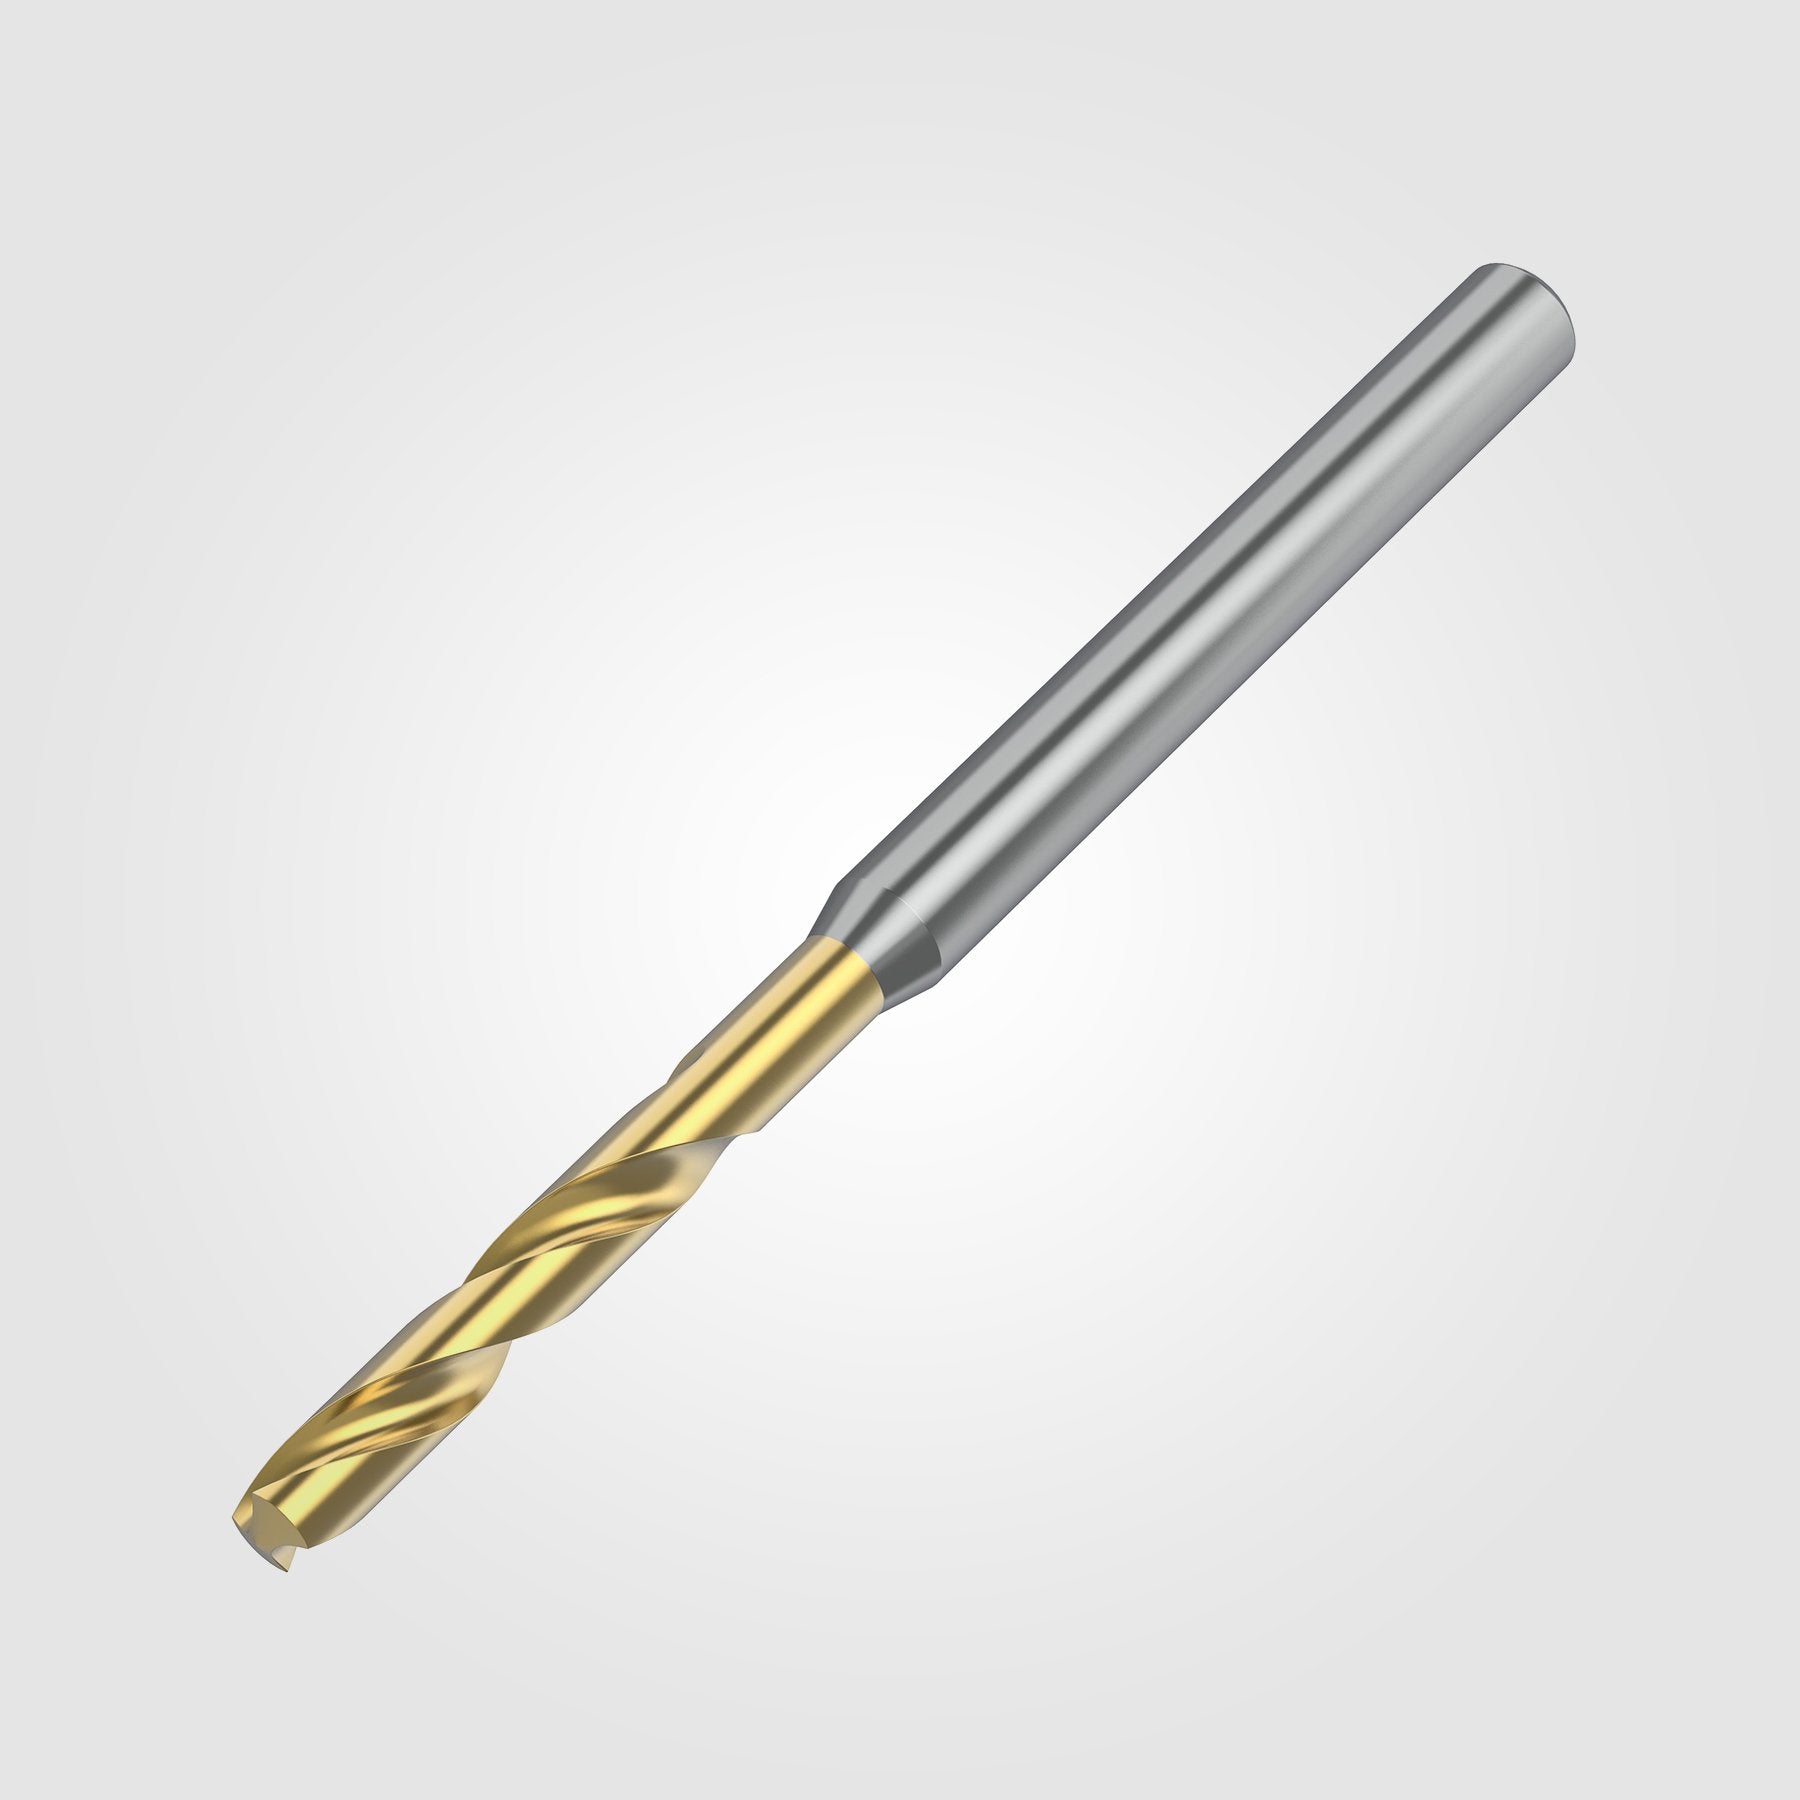 GOdrill (THROUGH COOLANT) | 8mm / .3150" / 3xD | SOLID CARBIDE DRILL | 4151175